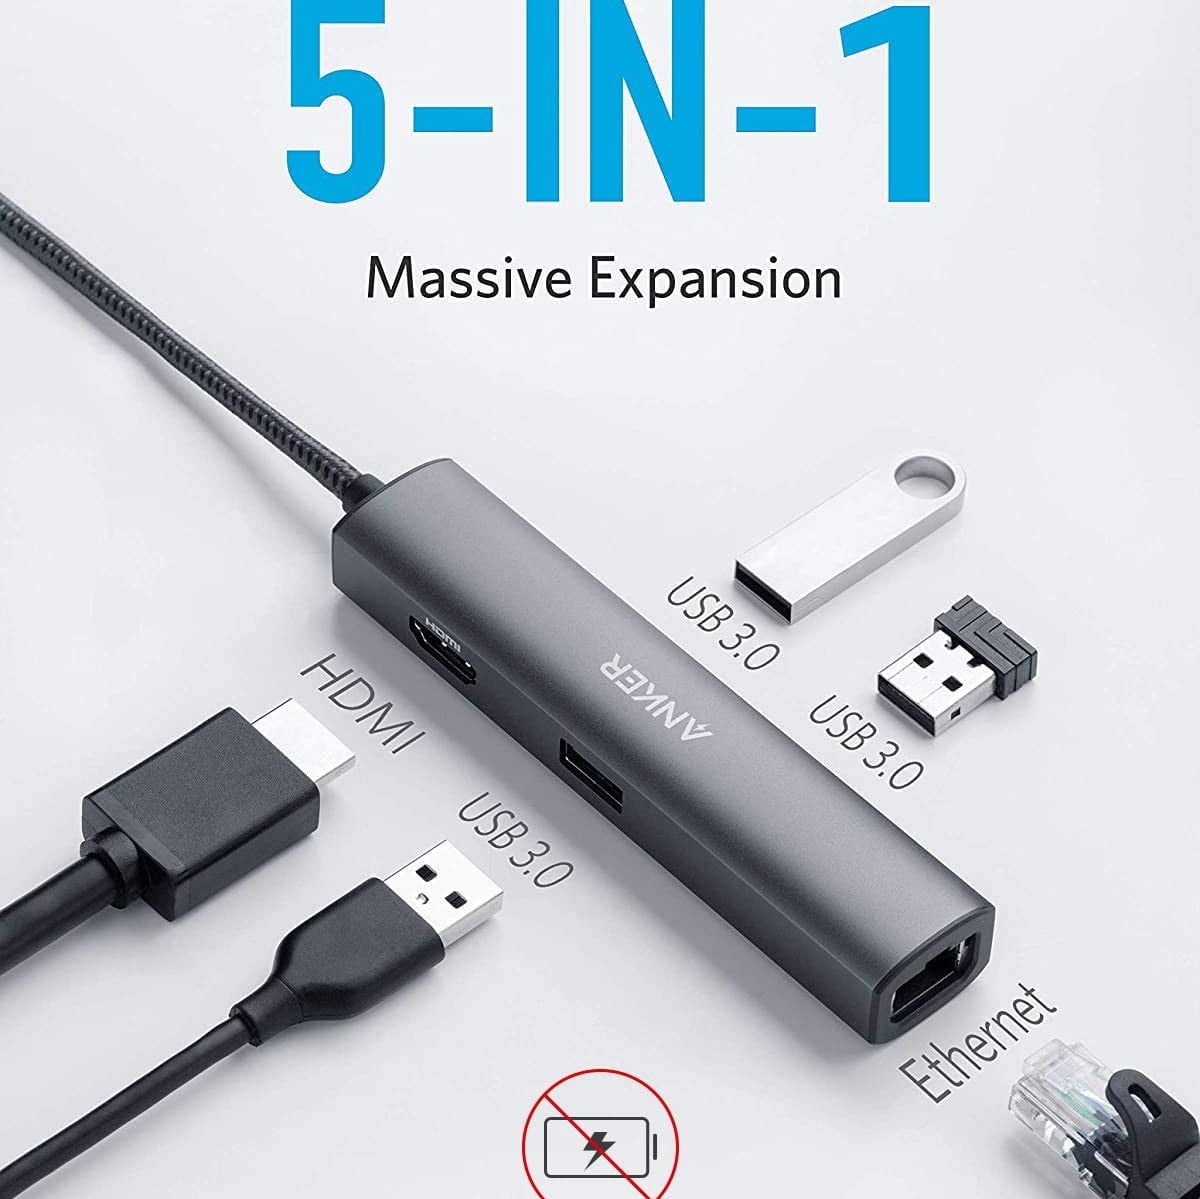 Anker Usb C Hub [Upgraded], 5-In-1 Usb C Adapter With 4K Usb C To Hdmi, Ethernet Port, 3 Usb 3.0 Ports